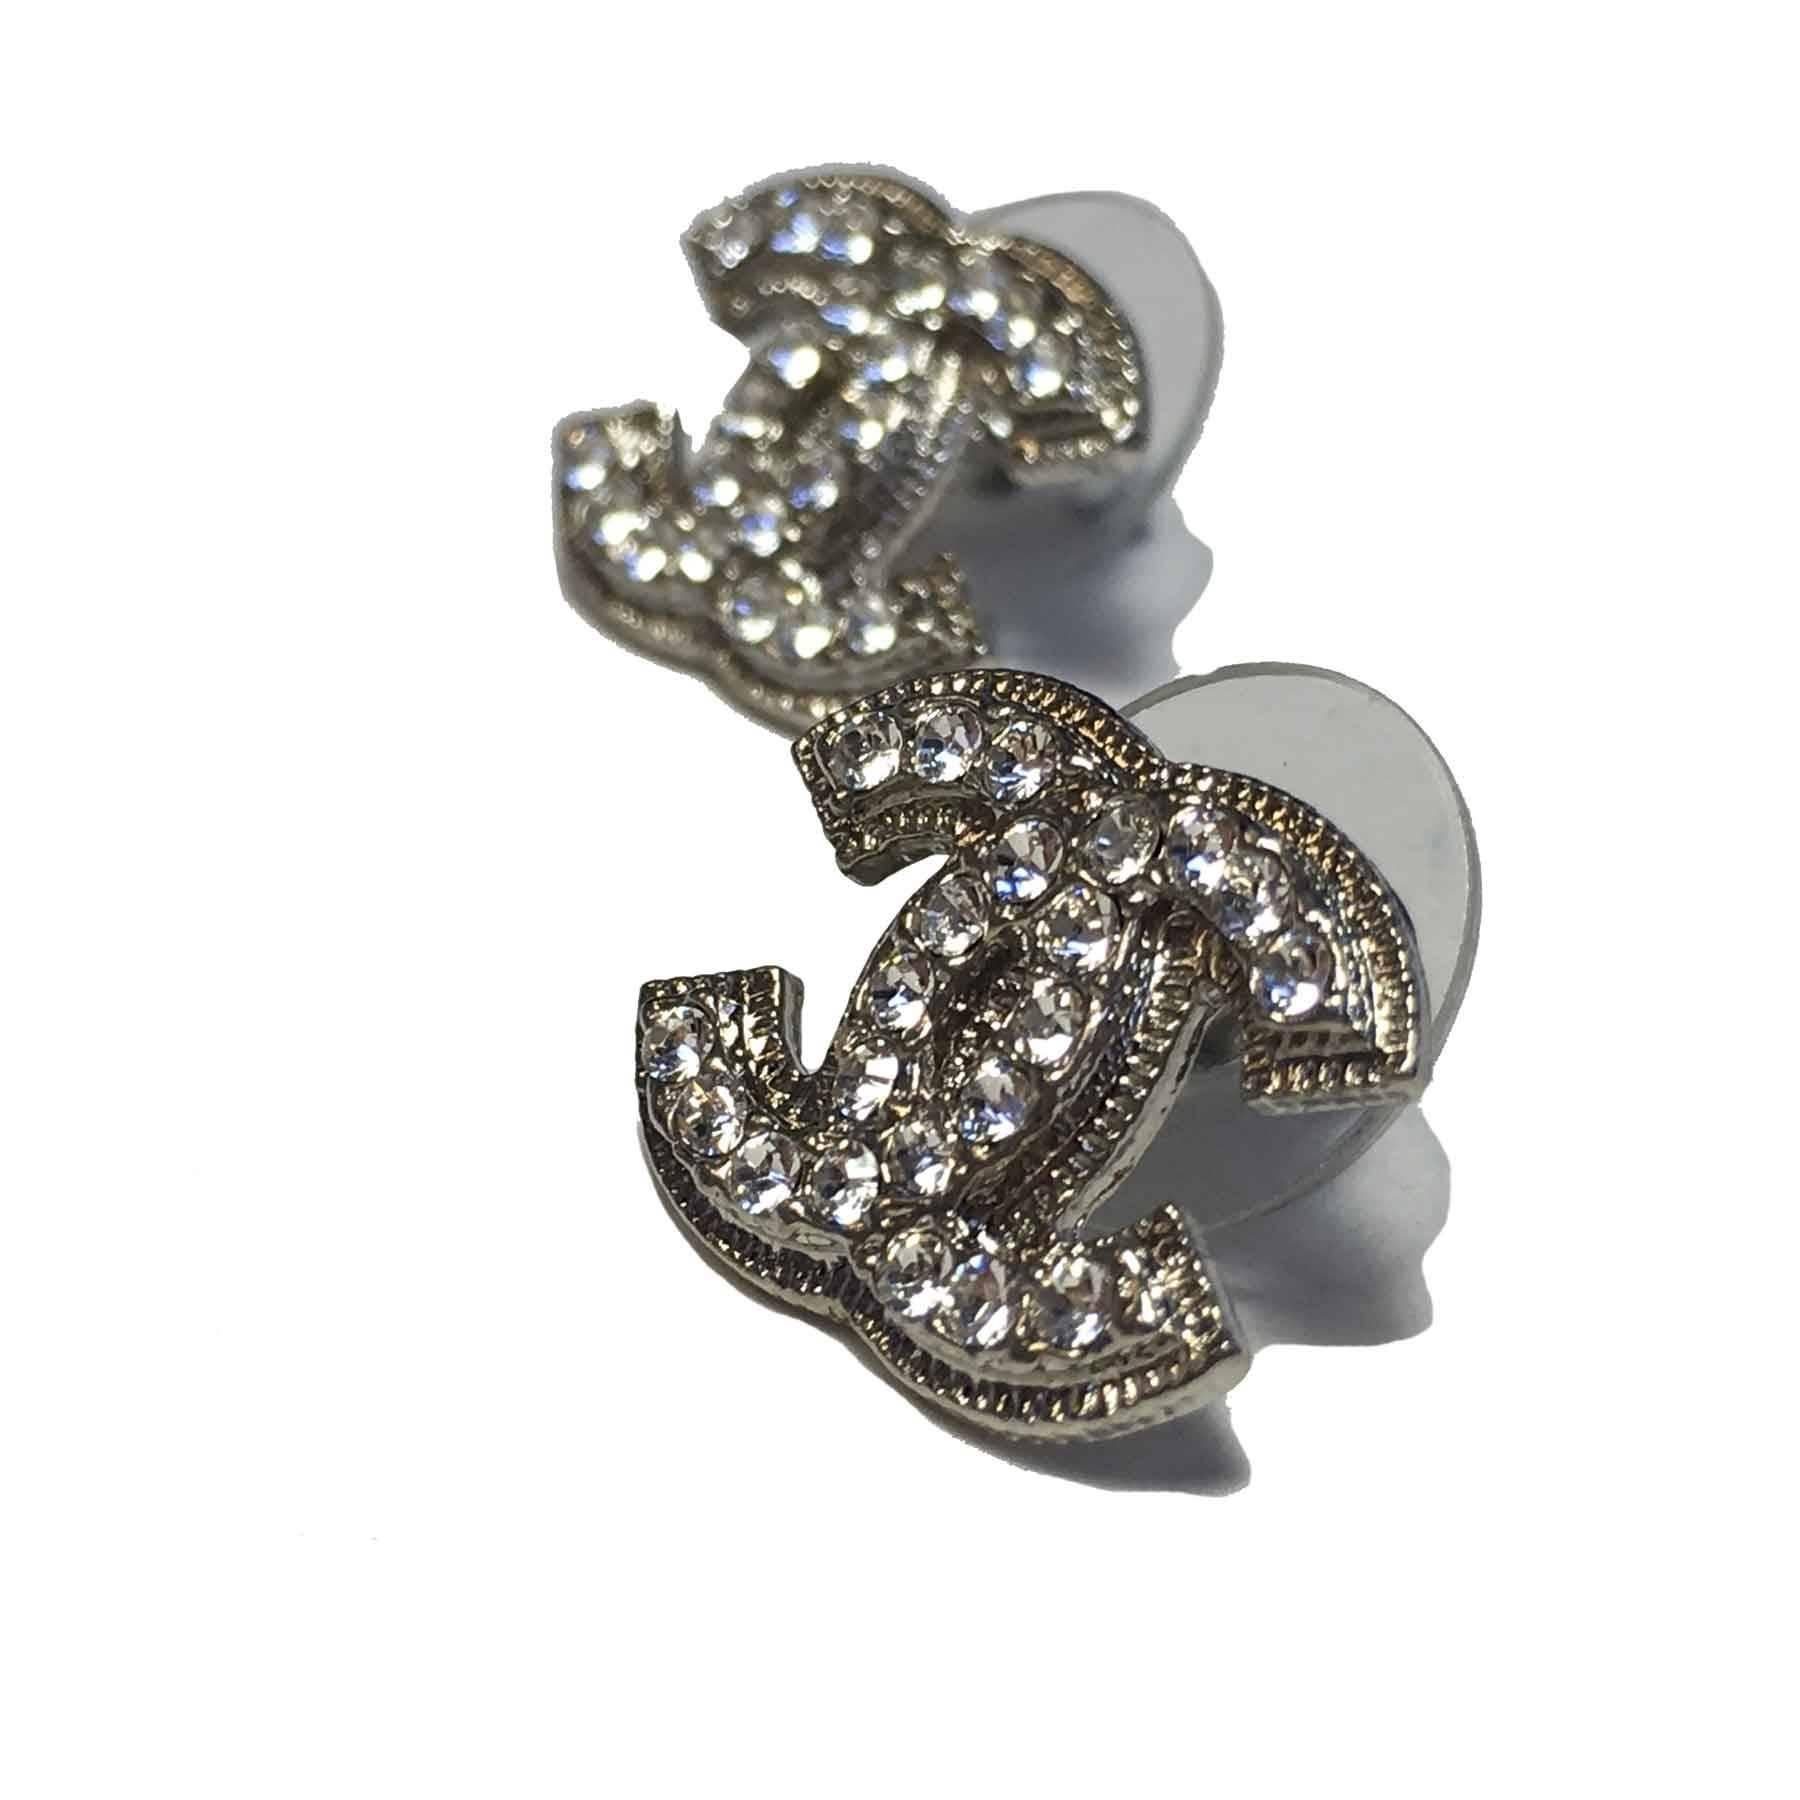 Unmissable Chanel CC silver Tone studs set with rhinestones earrings.

Never worn.

Collection : Autumn 2014

Dimensions: 1,8x1,3 cm

Delivered in a dust bag Valois Vintage Paris